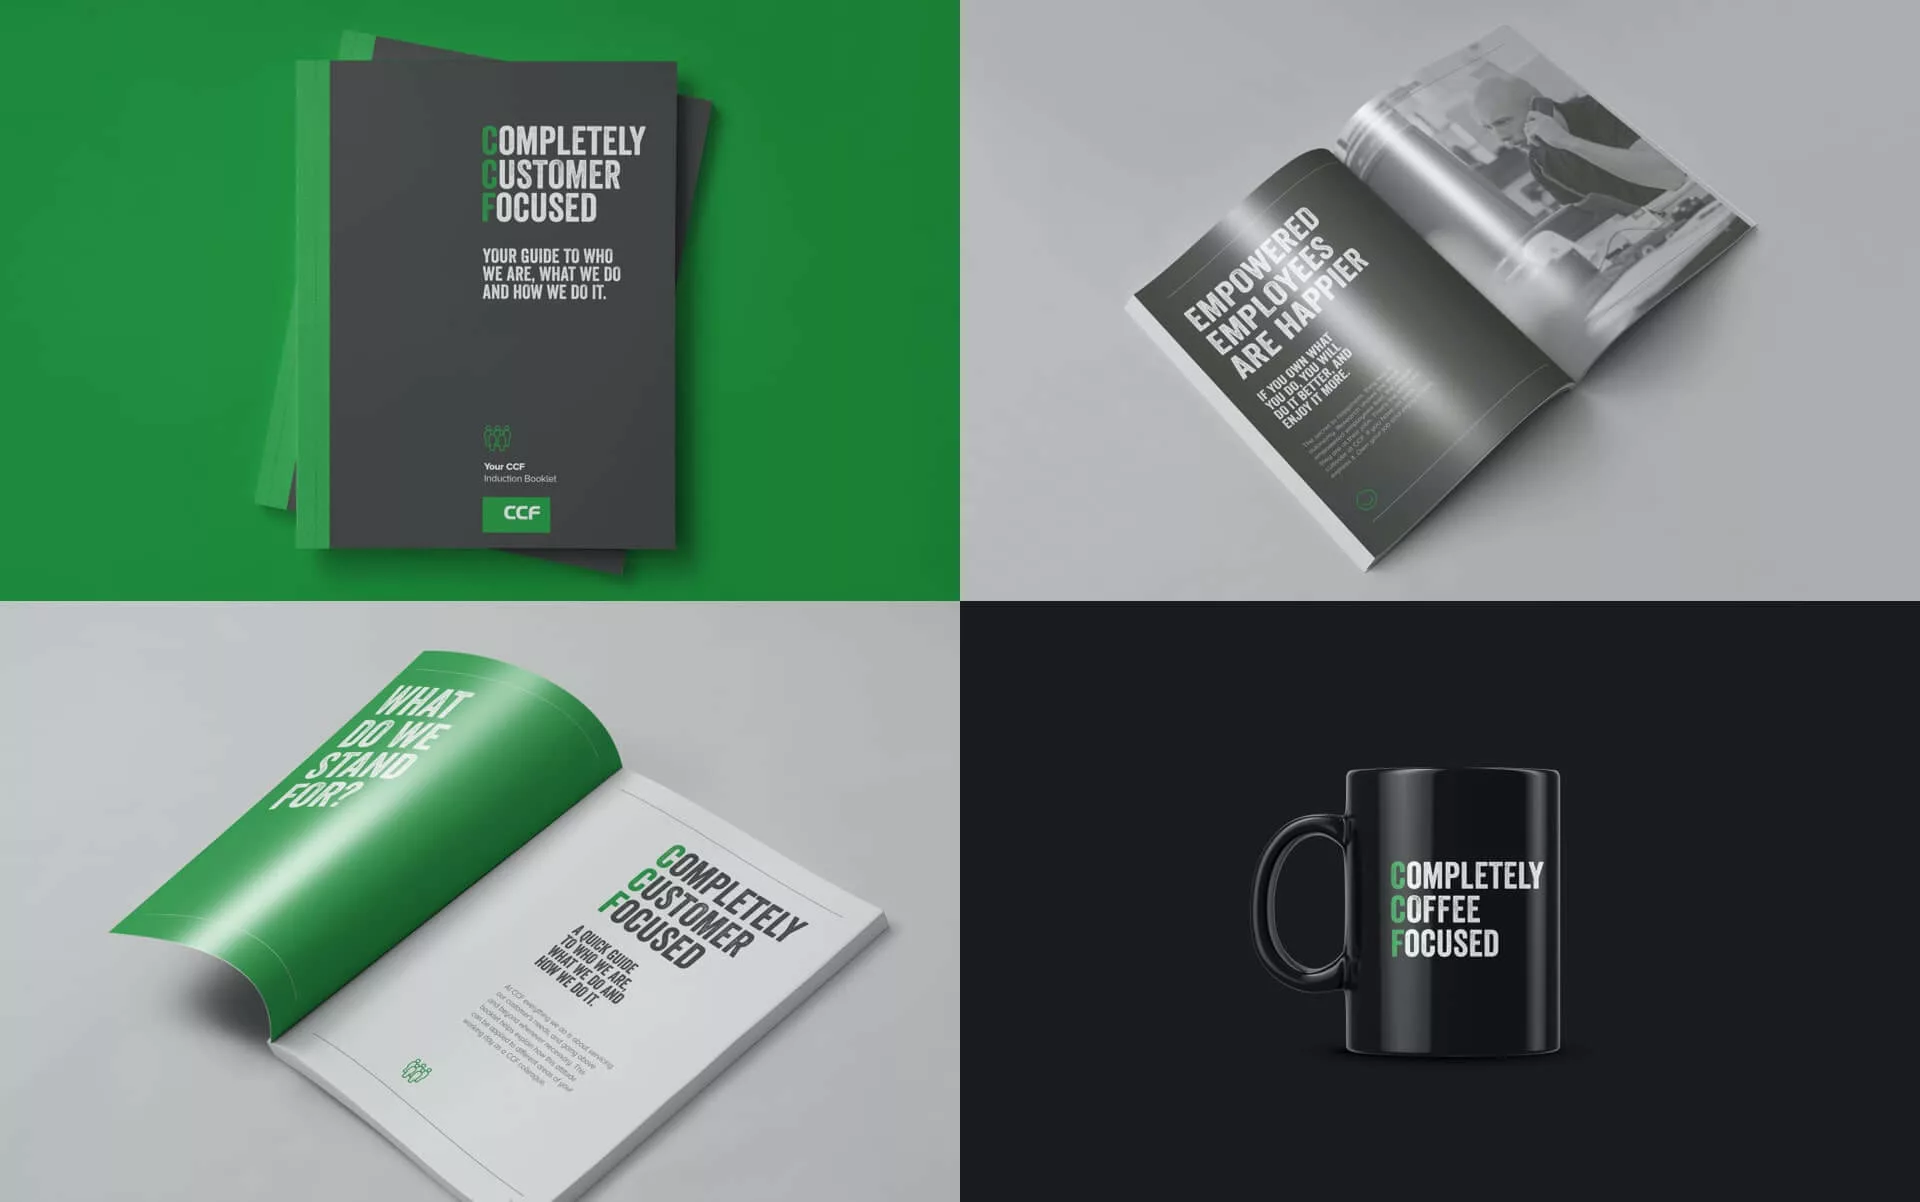 4 images of different coloured backgrounds displaying branded items from CCF